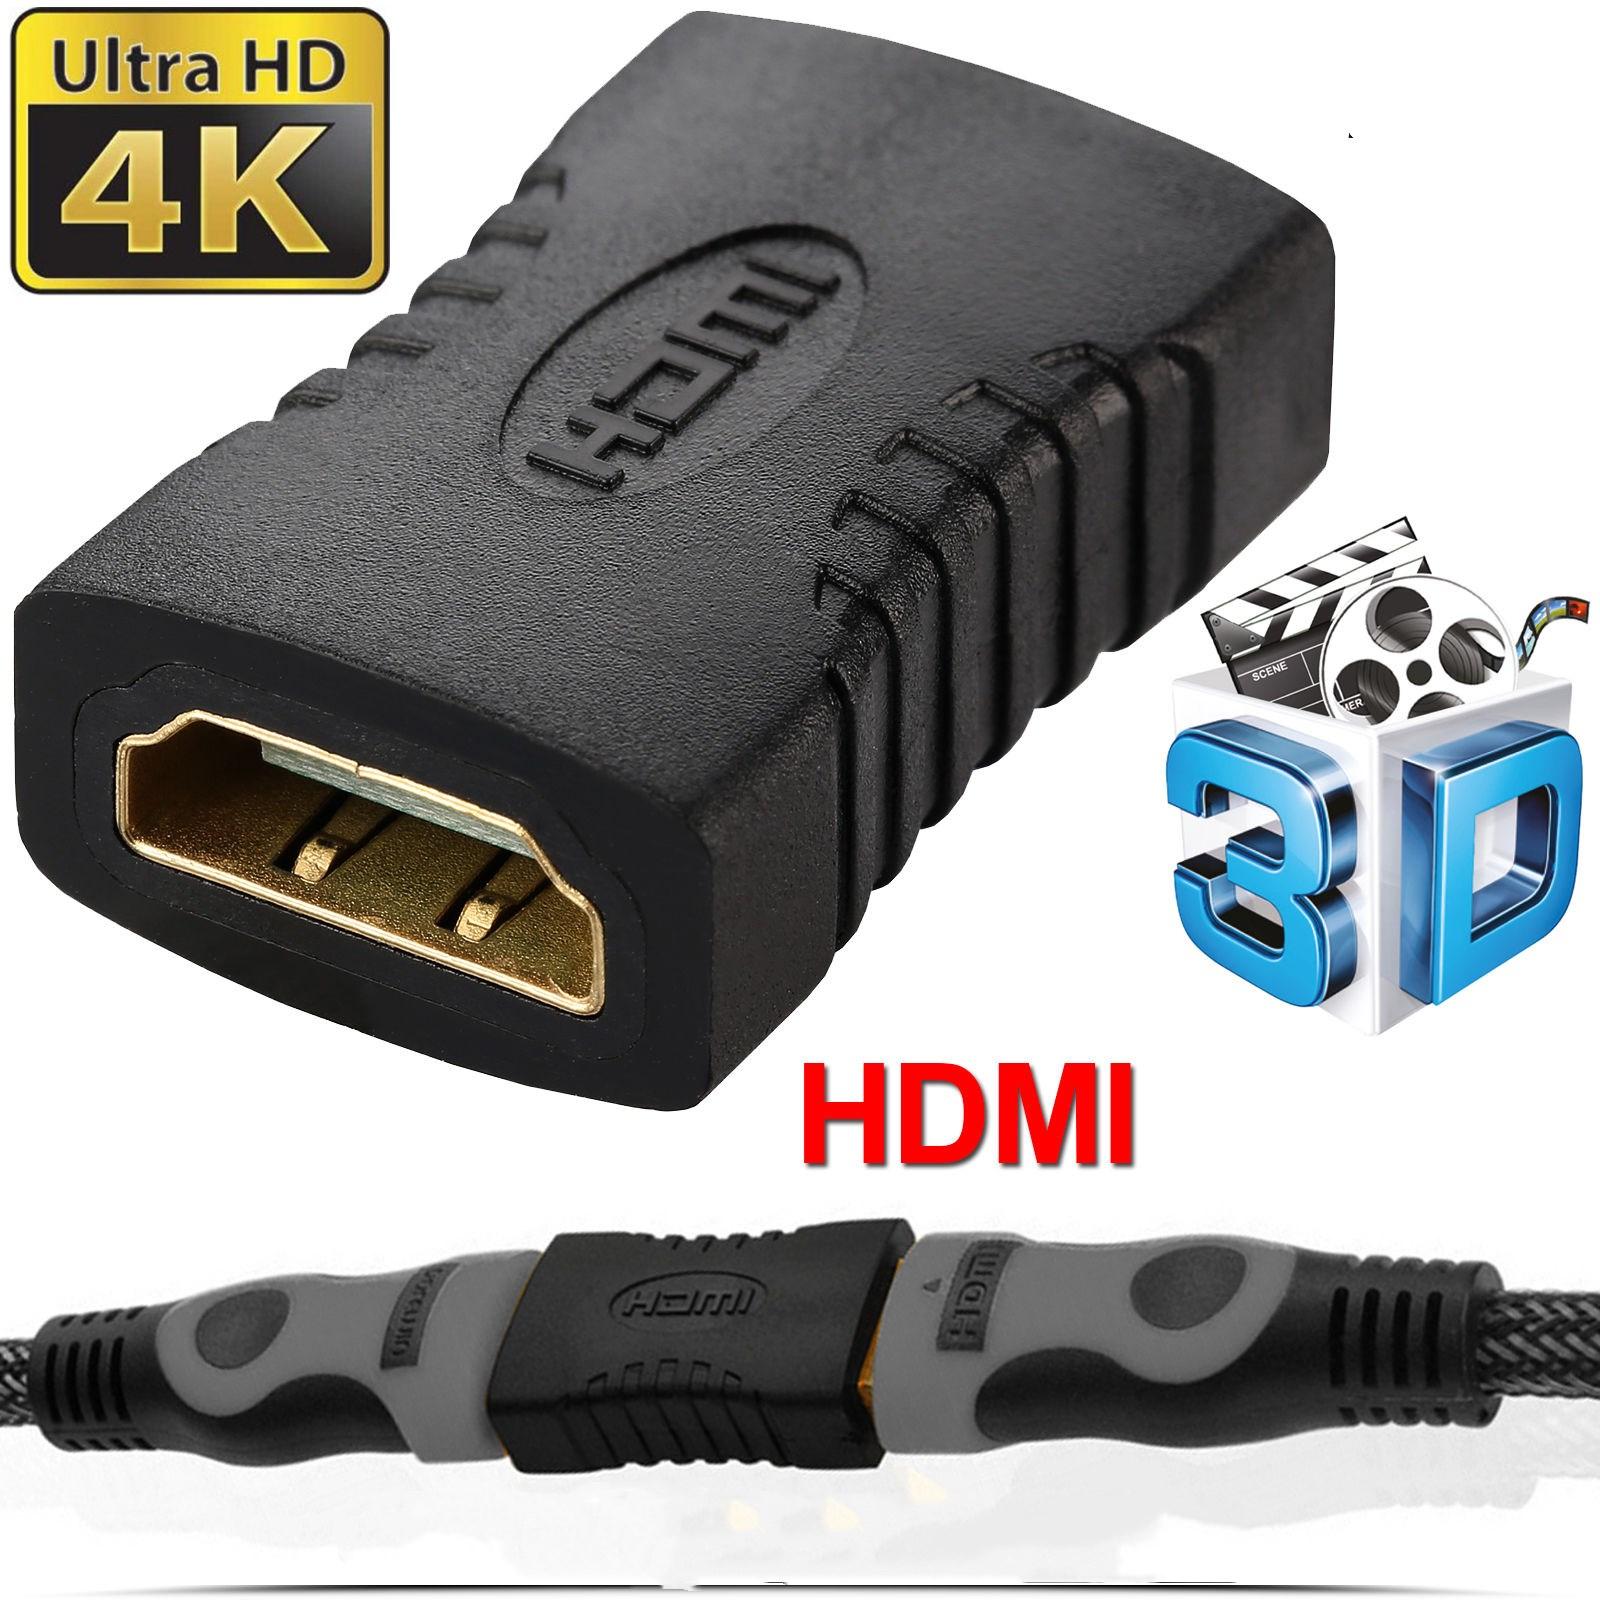 HDMI EXTENDER FEMALE TO FEMALE ADAPTER JOINER CONNECTOR COUPLER for 1080P HD TV